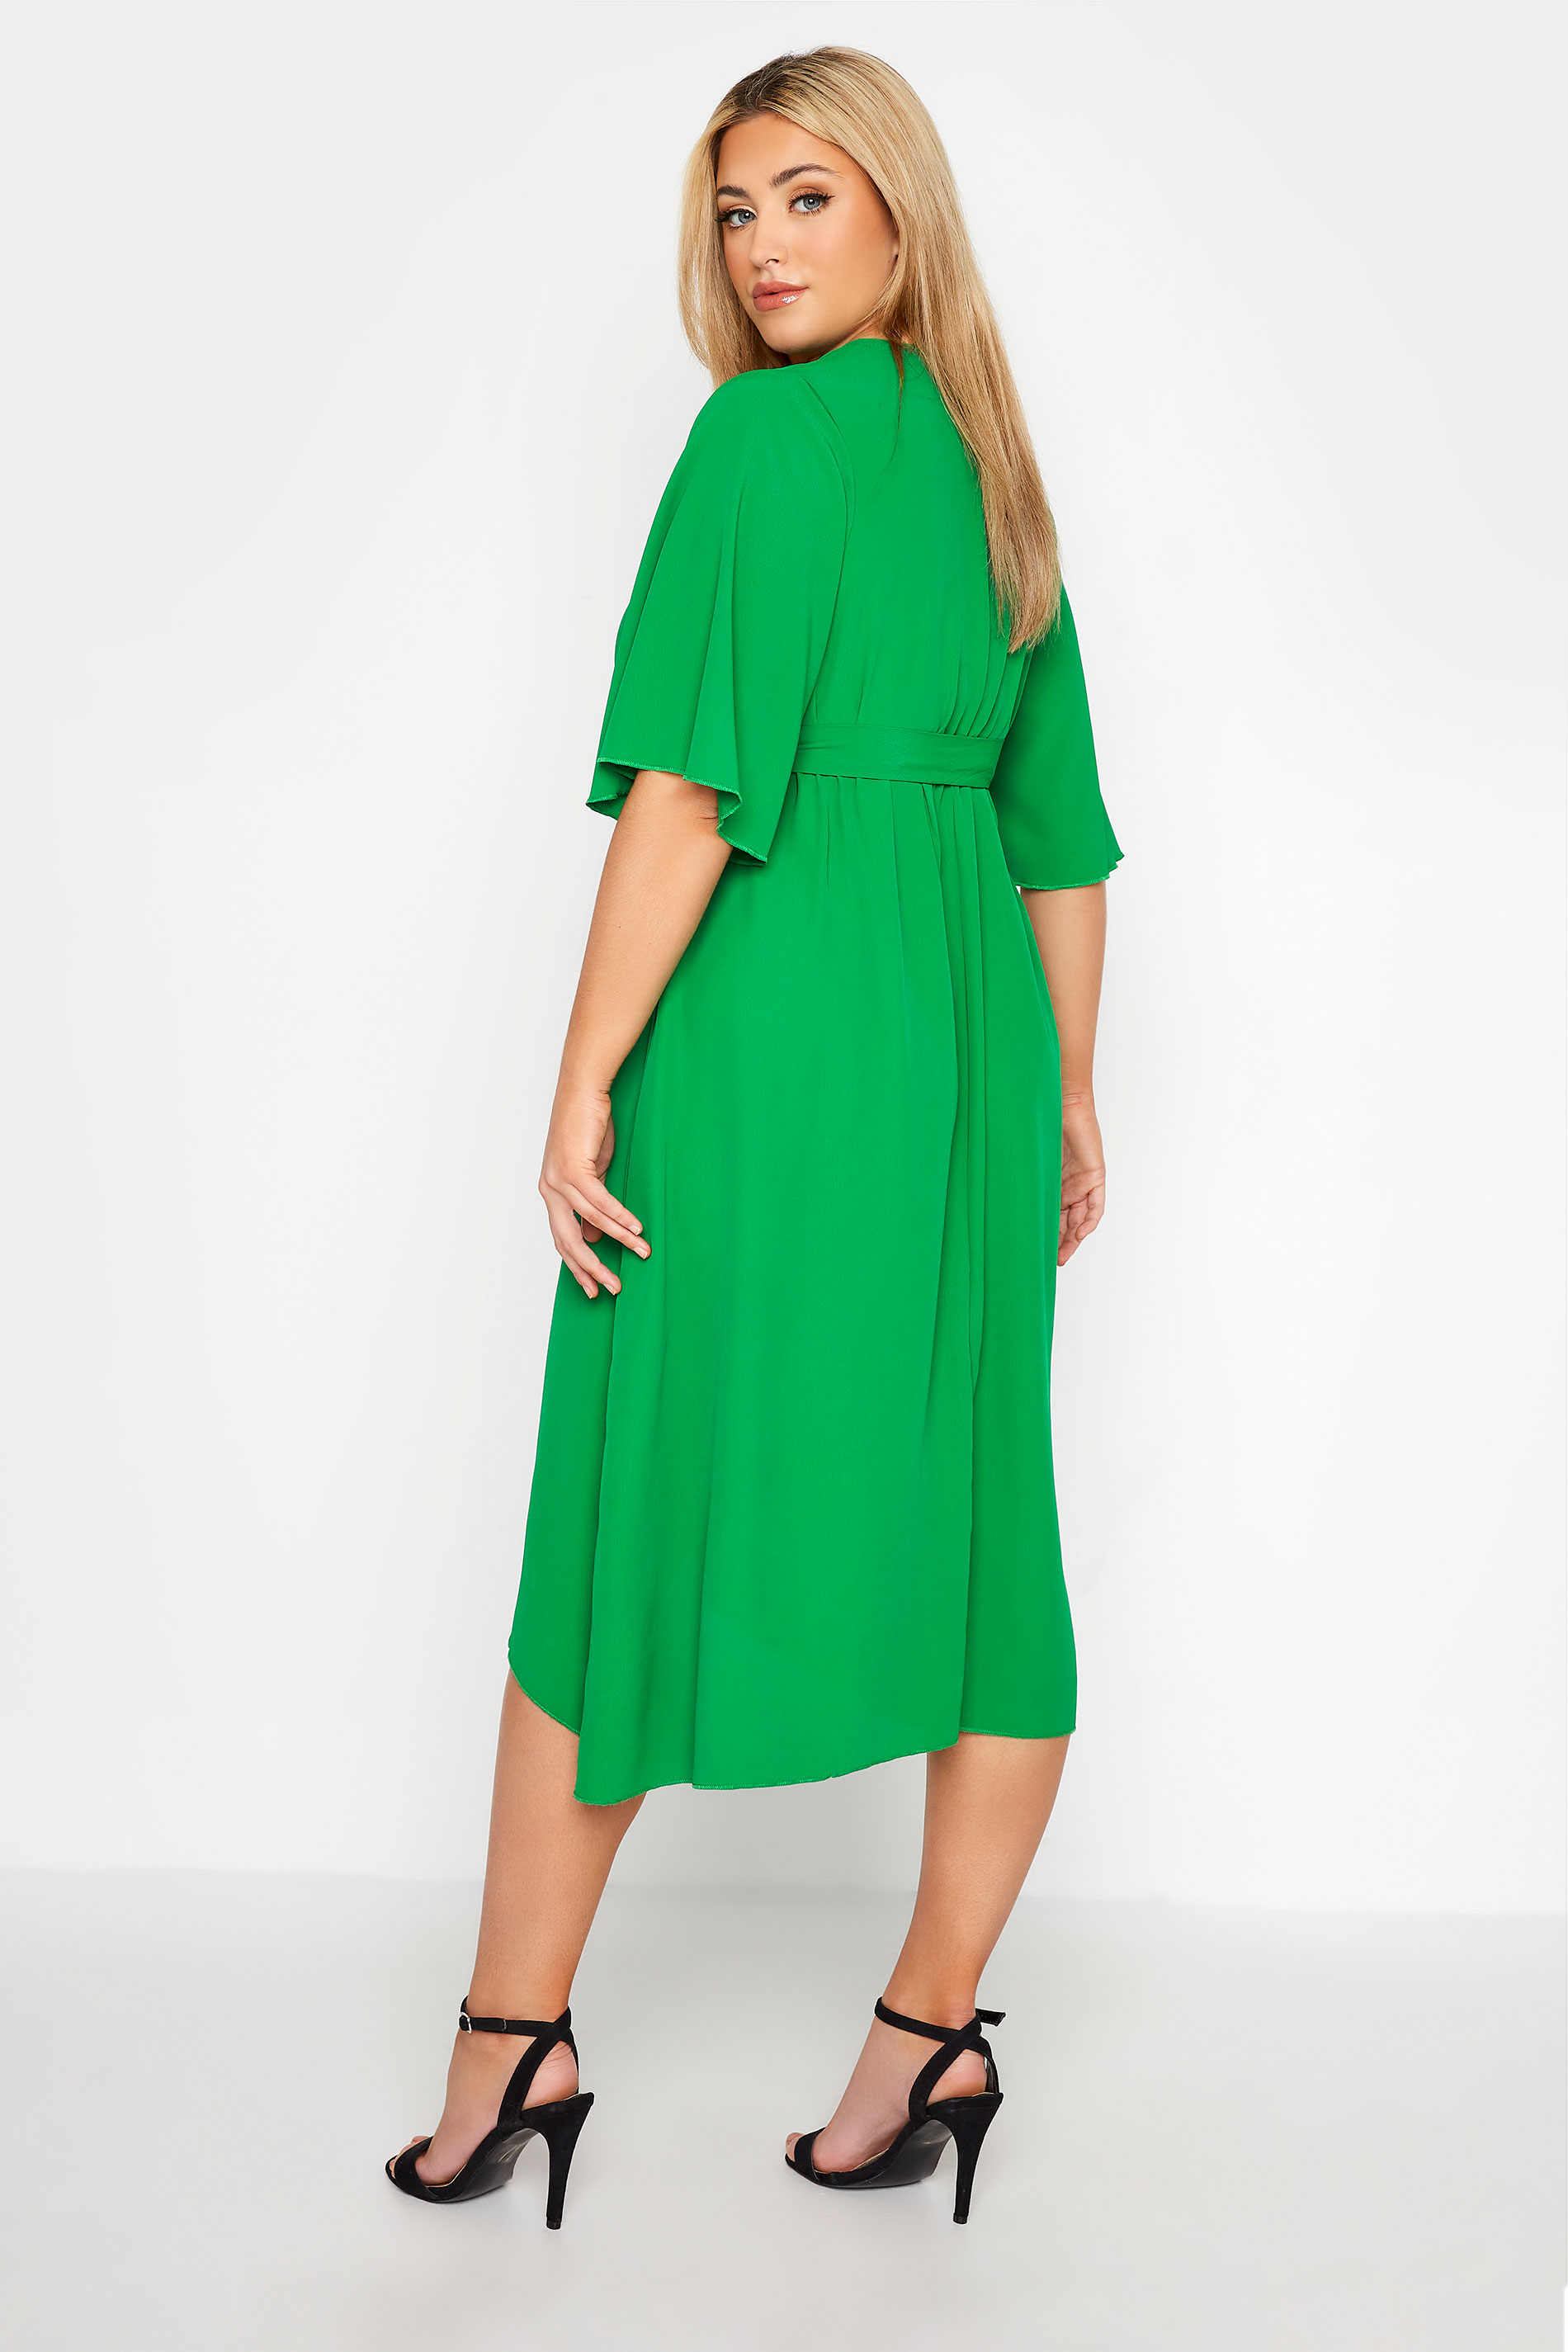 YOURS LONDON Plus Size Bright Green Midi Wrap Dress | Yours Clothing 3